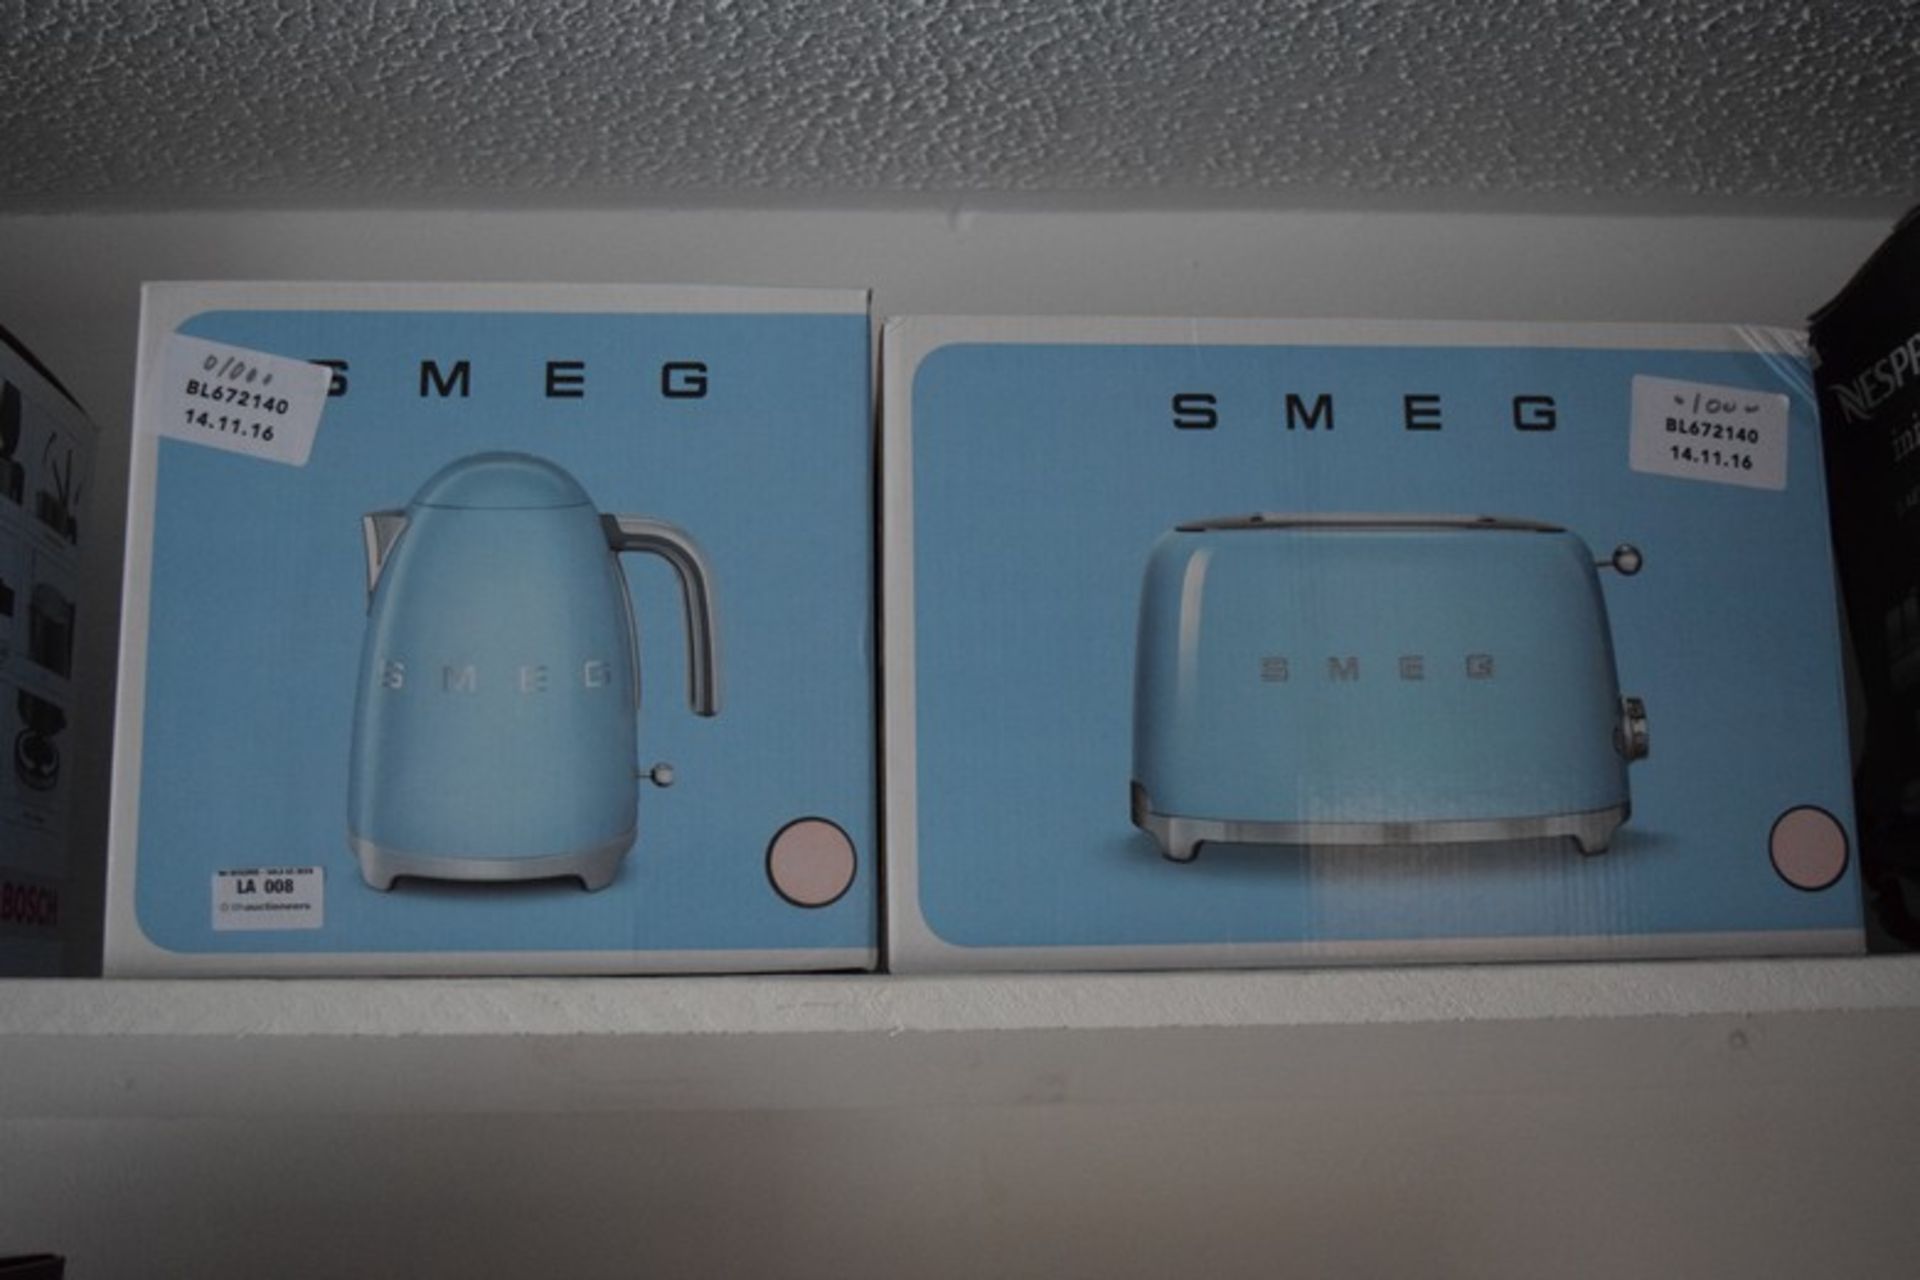 2 x BOXED ITEMS TO INCLUDE A SMEG CLASSIC KETTLE AND A SMEG CLASSIC 2-SLICE TOASTER COMBINED RRP £